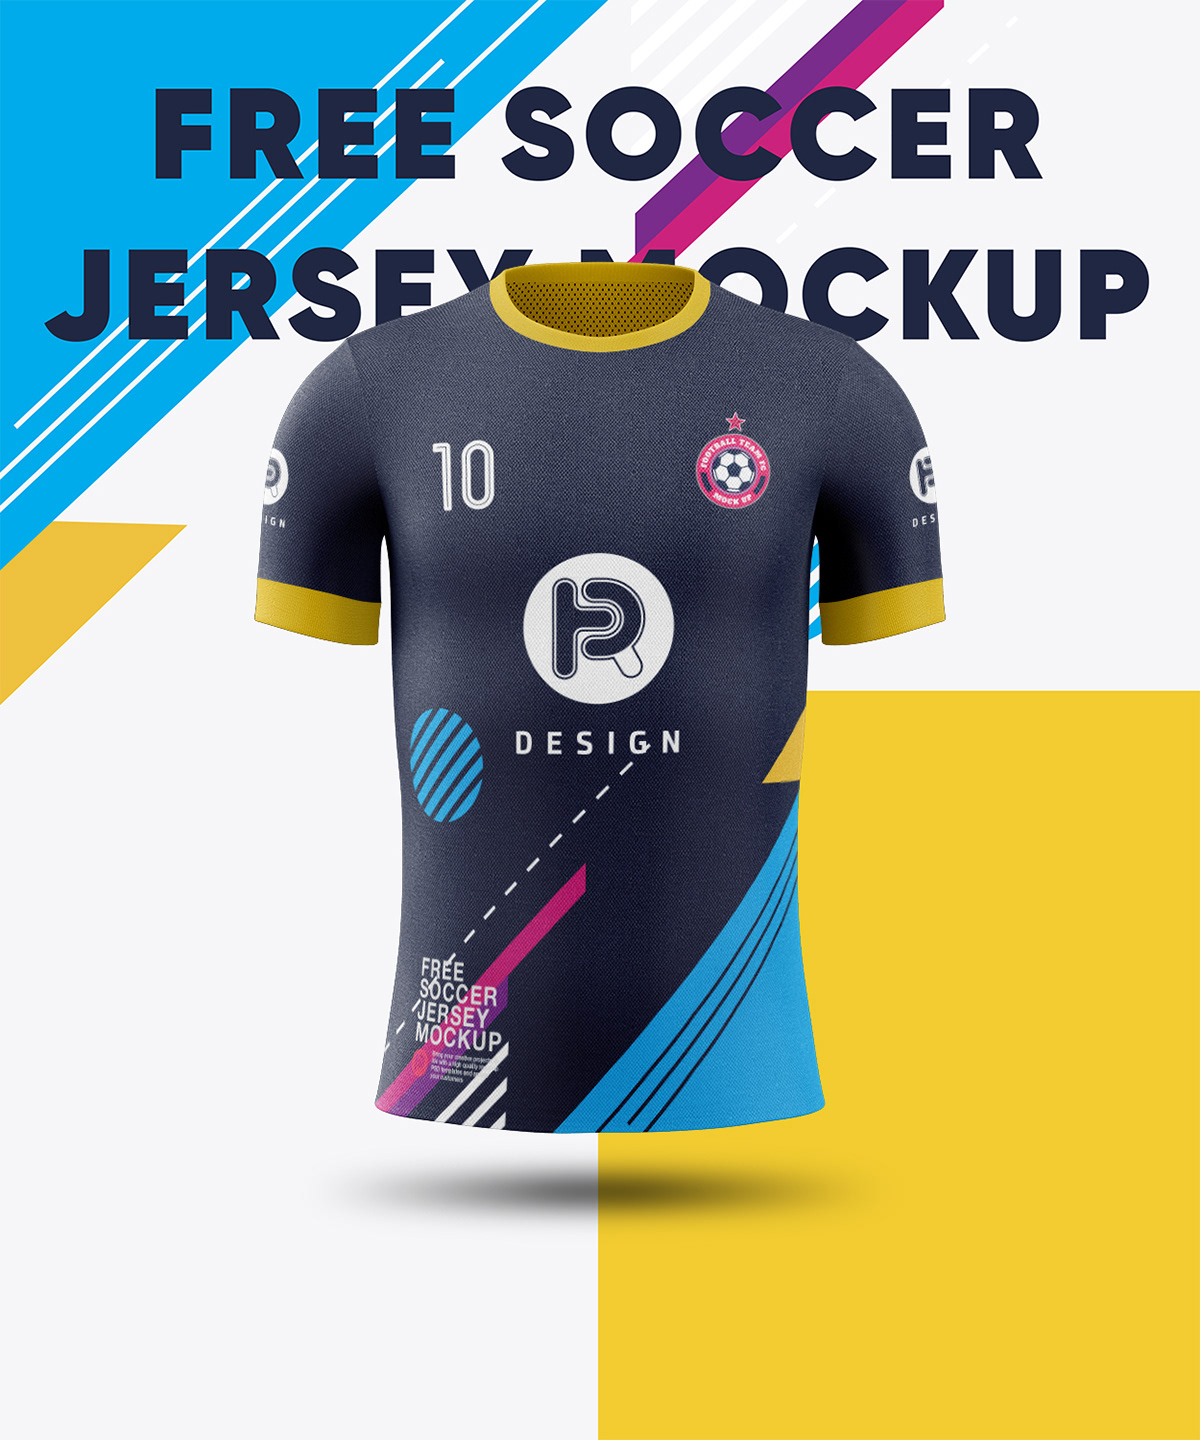 Download Free Soccer Jersey Mockup (Front View) on Behance